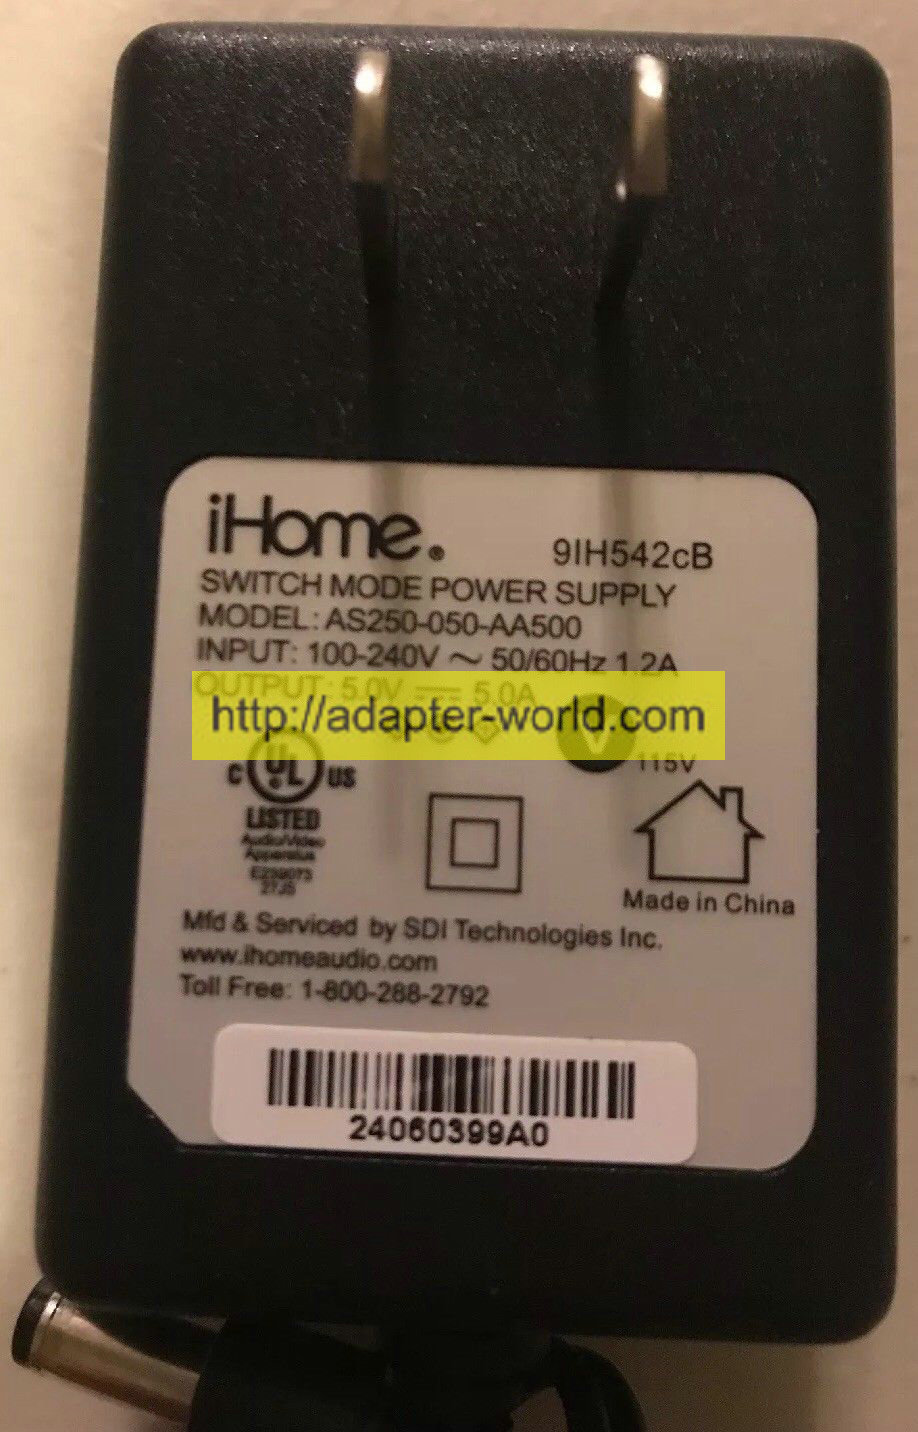 *100% Brand NEW* iHome AS250-050-AA500 Output 5V 5.0A 9IH542cB AC Replacement Power Adapter Free shipping! - Click Image to Close